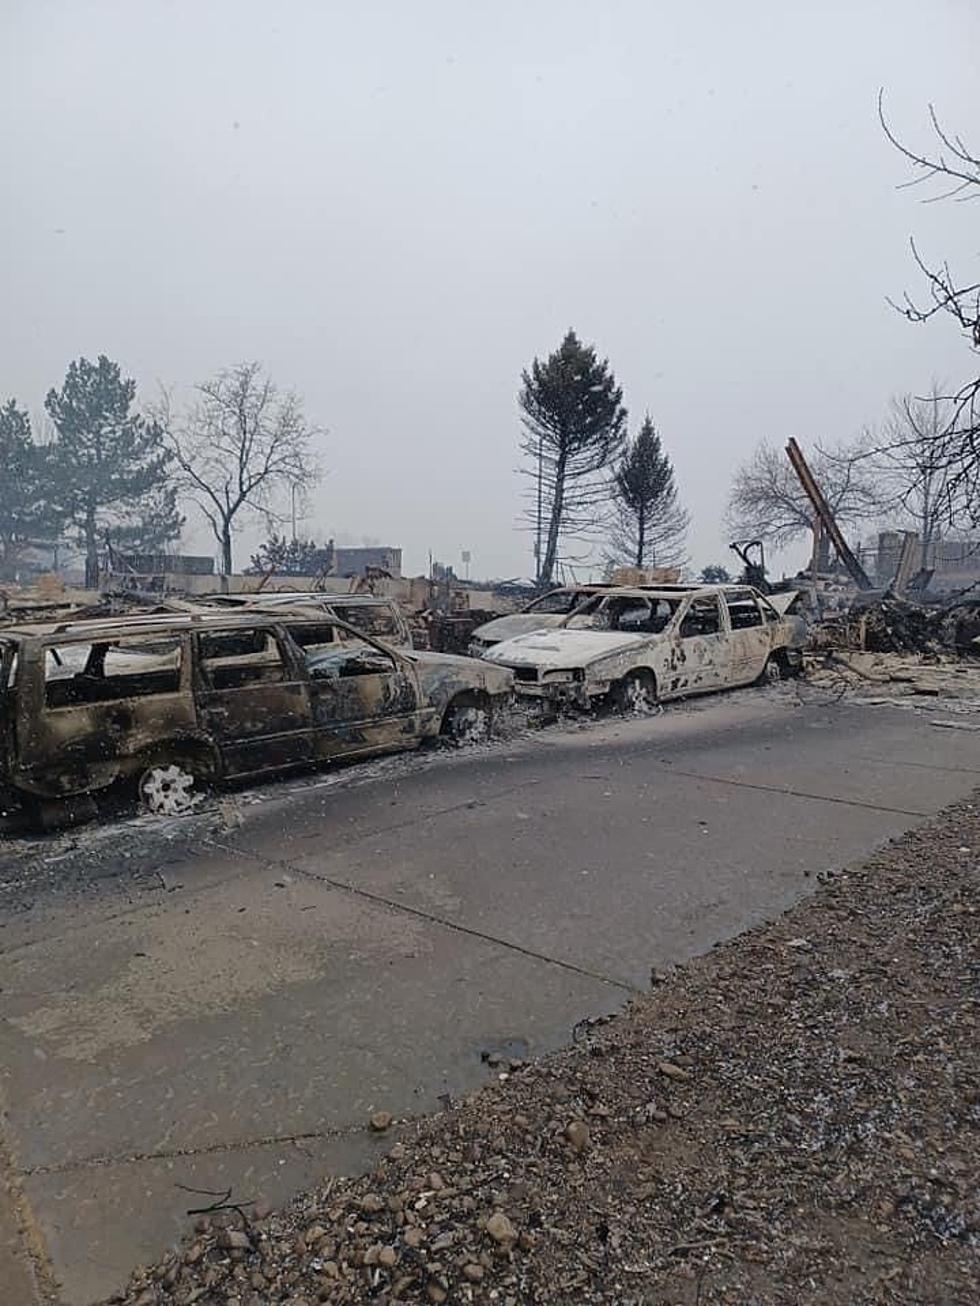 Have You Seen Colorado’s Marshall Fire Aftermath? These Photos Are Heartbreaking